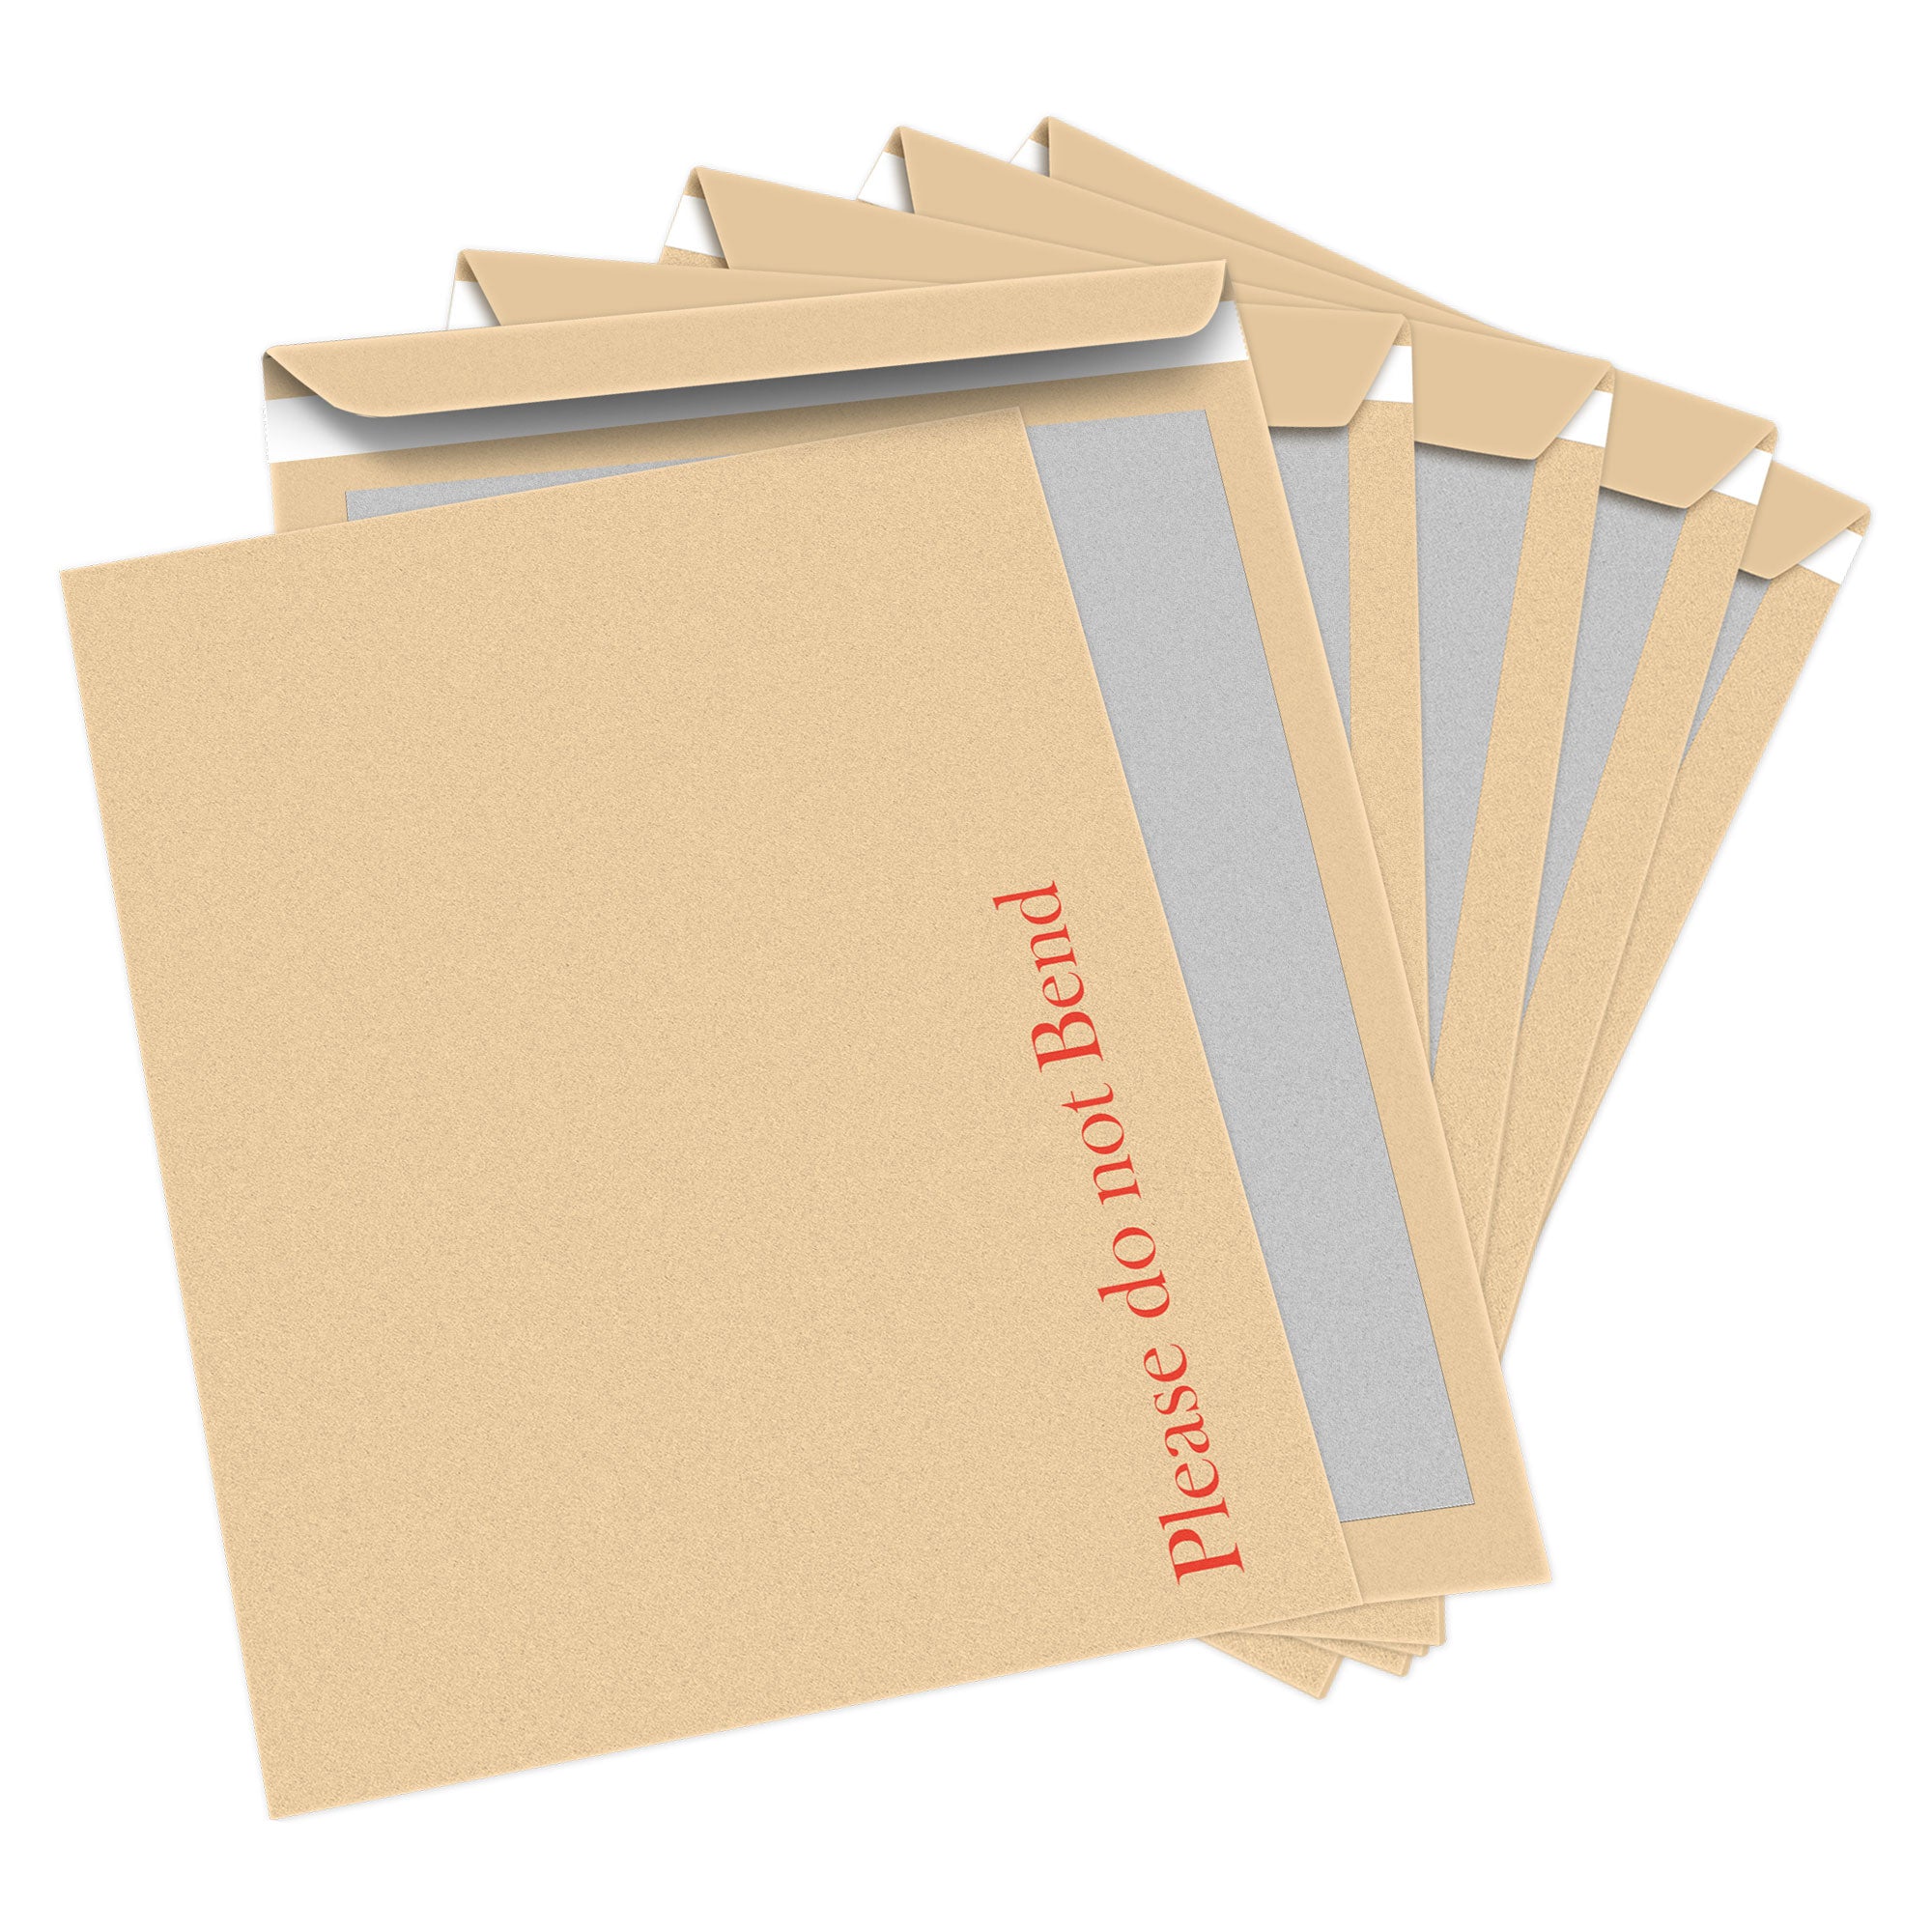 Hard Board Backed Envelopes 'Please do not bend' A6 / C6 - A5 / C5 - A4 /  C4